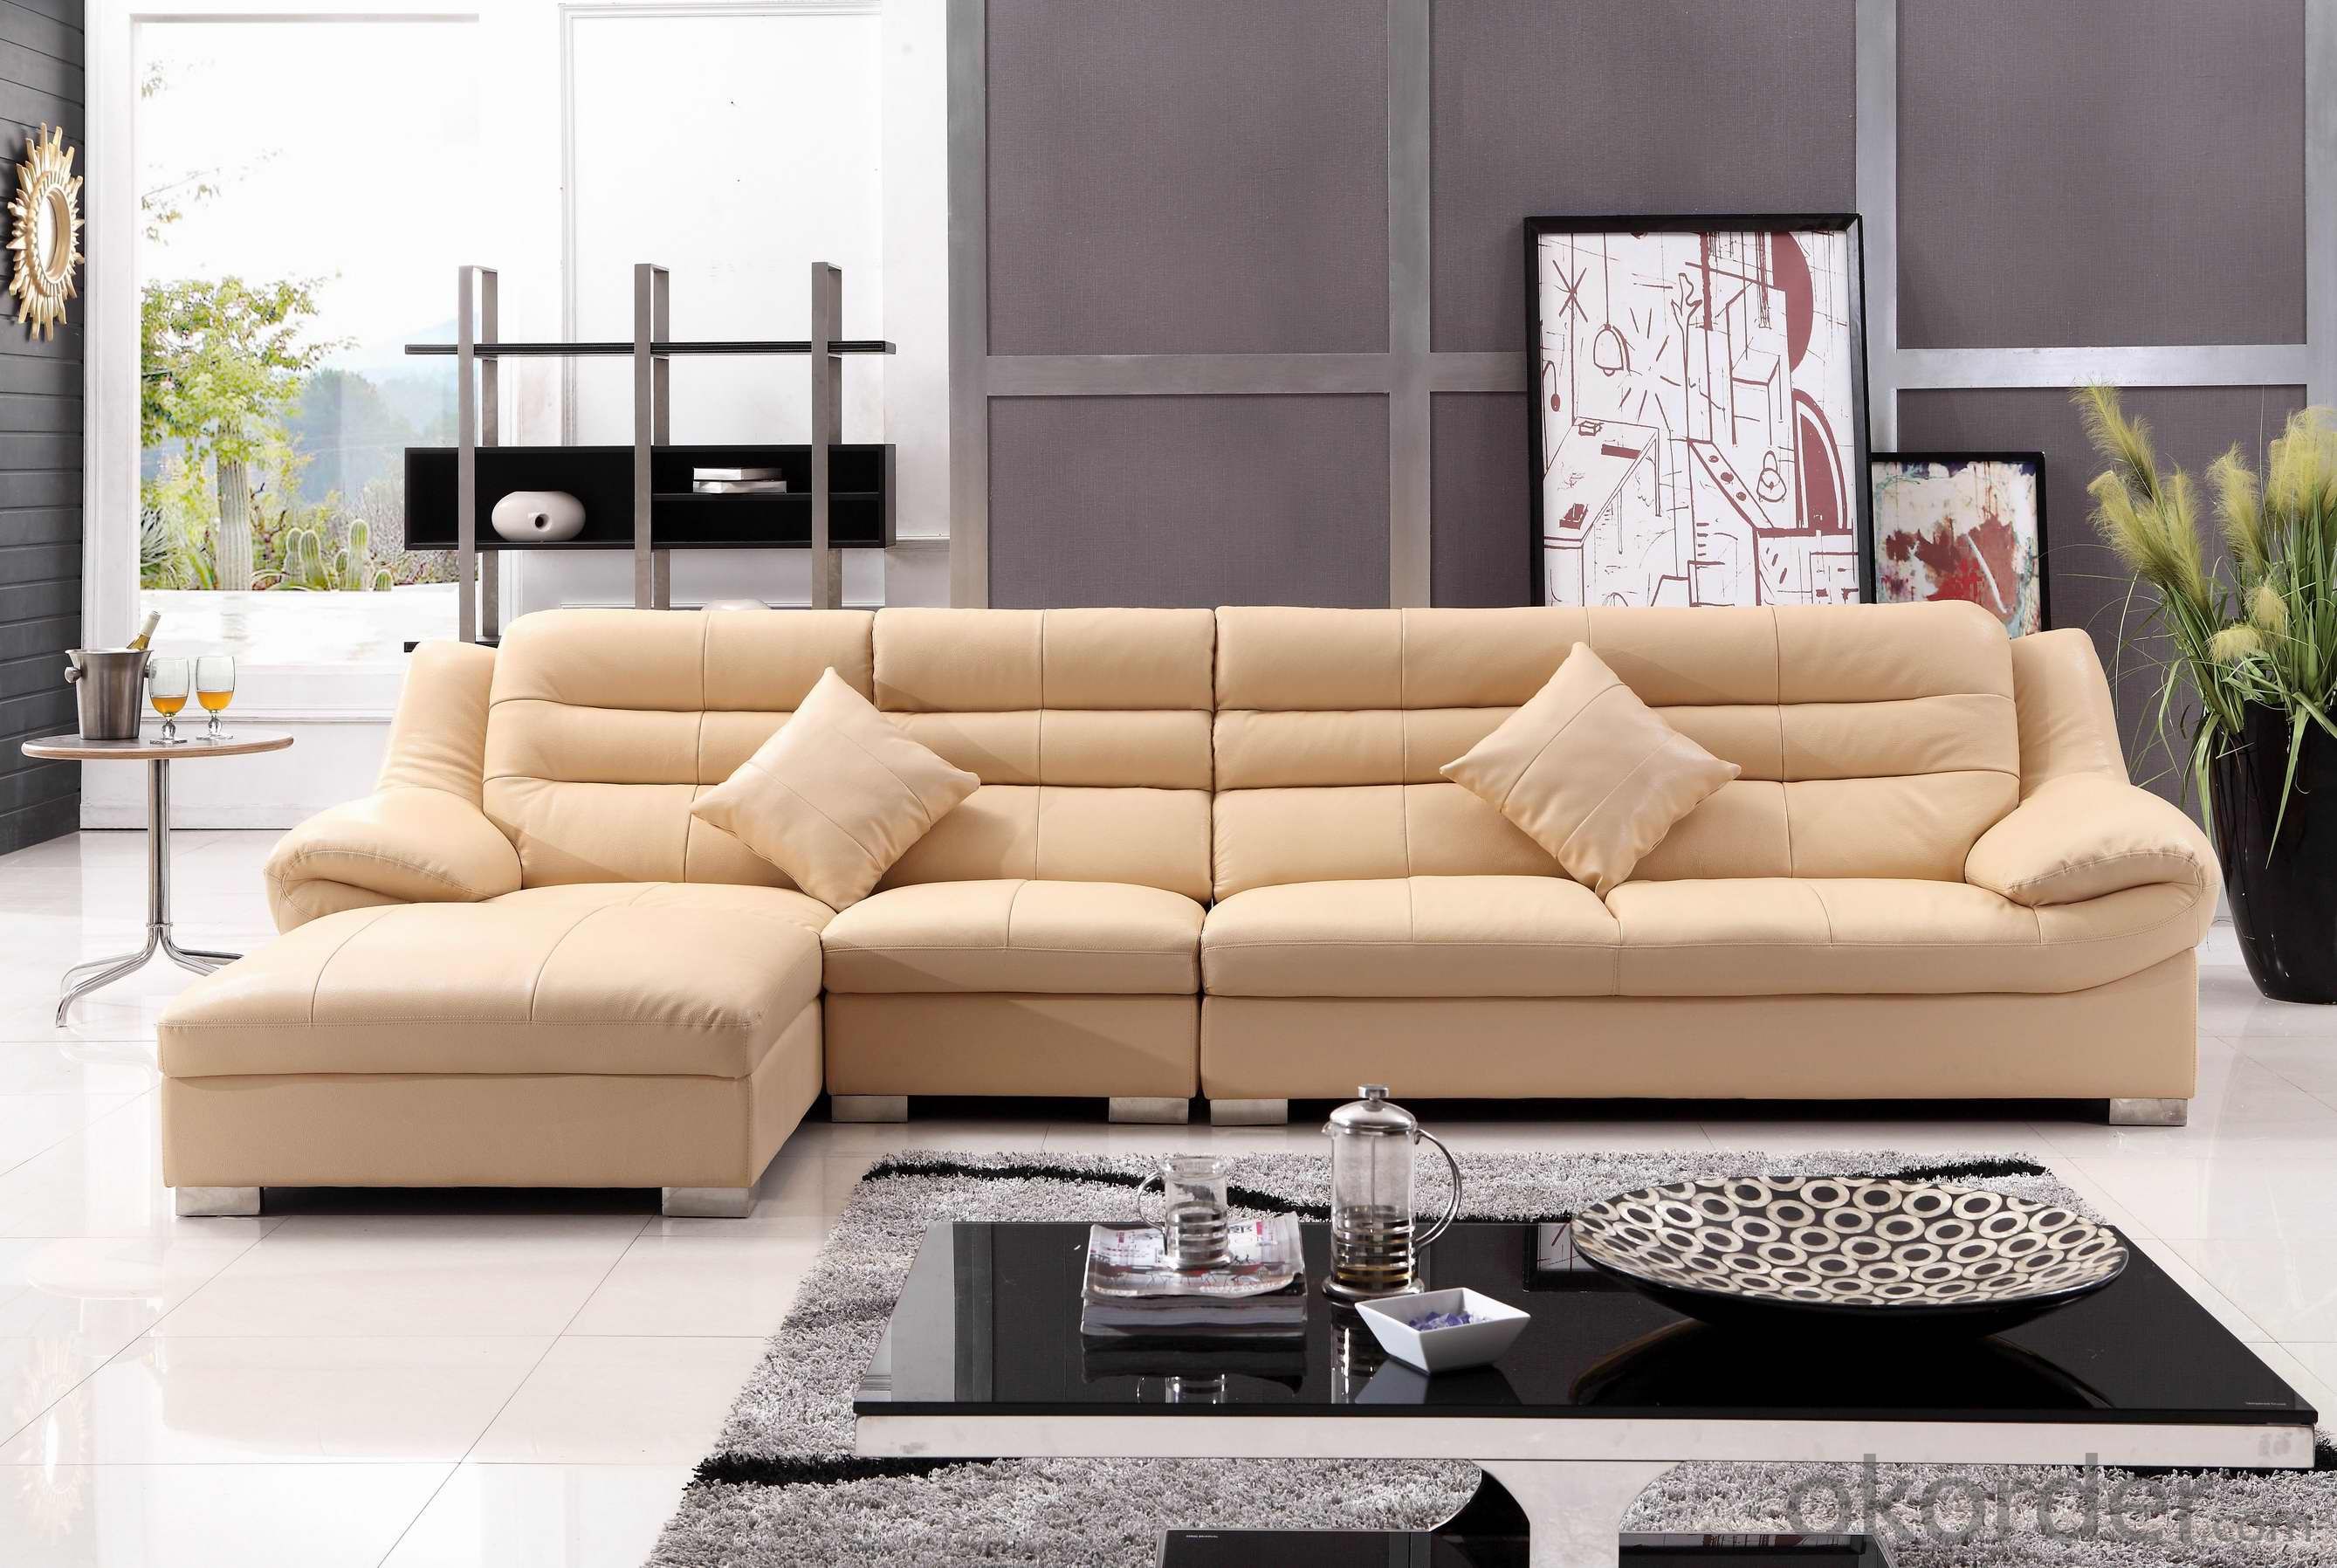 CNBM US popular leather sofa set CMAX-05 real-time quotes, last-sale ...